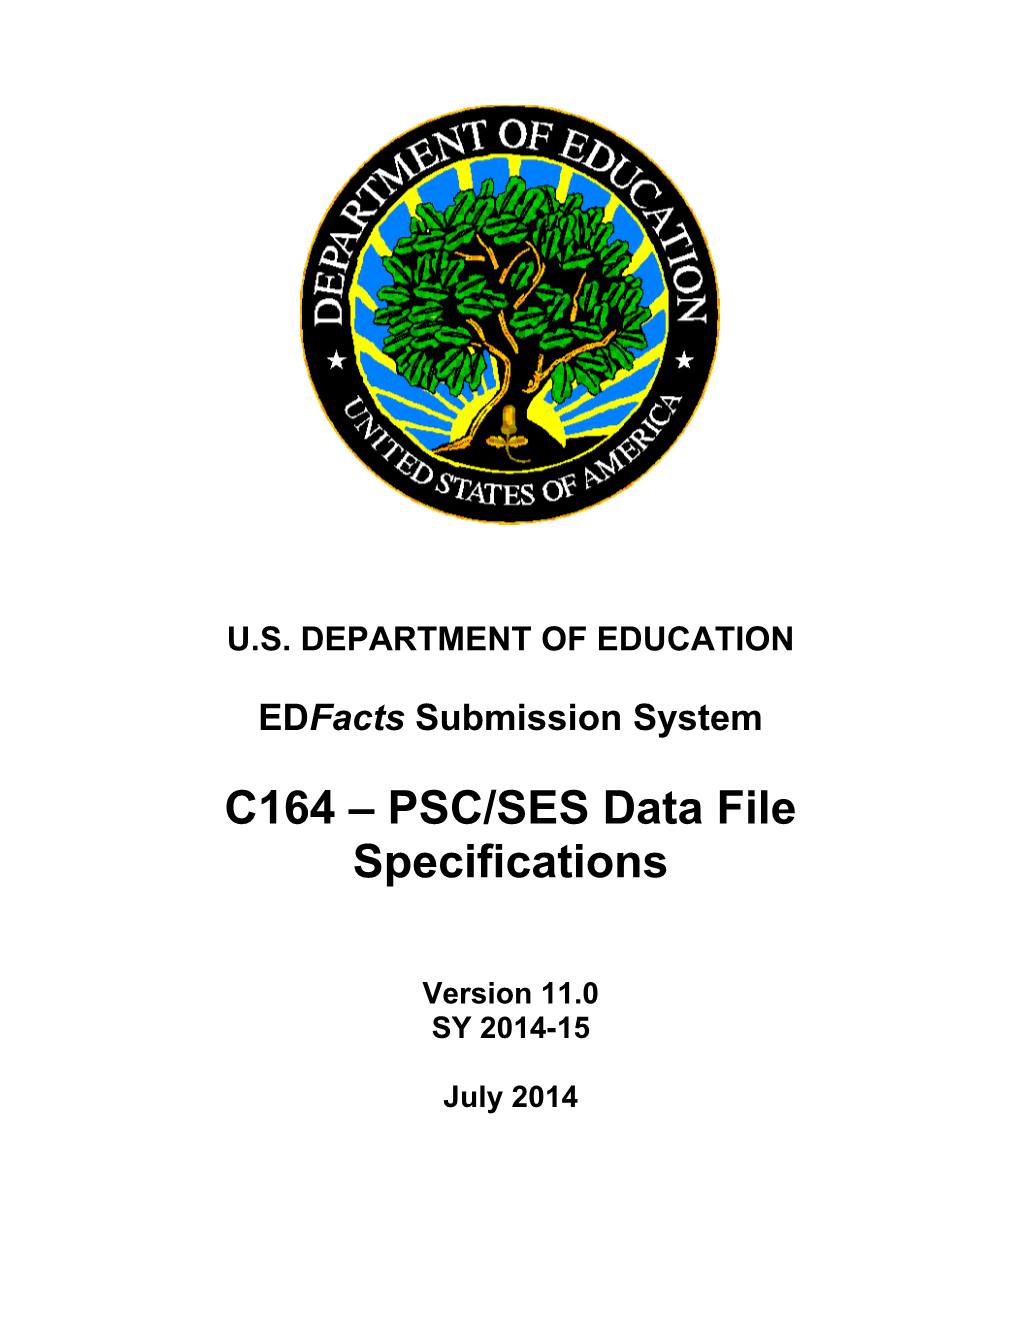 PSC/SES Data File Specifications